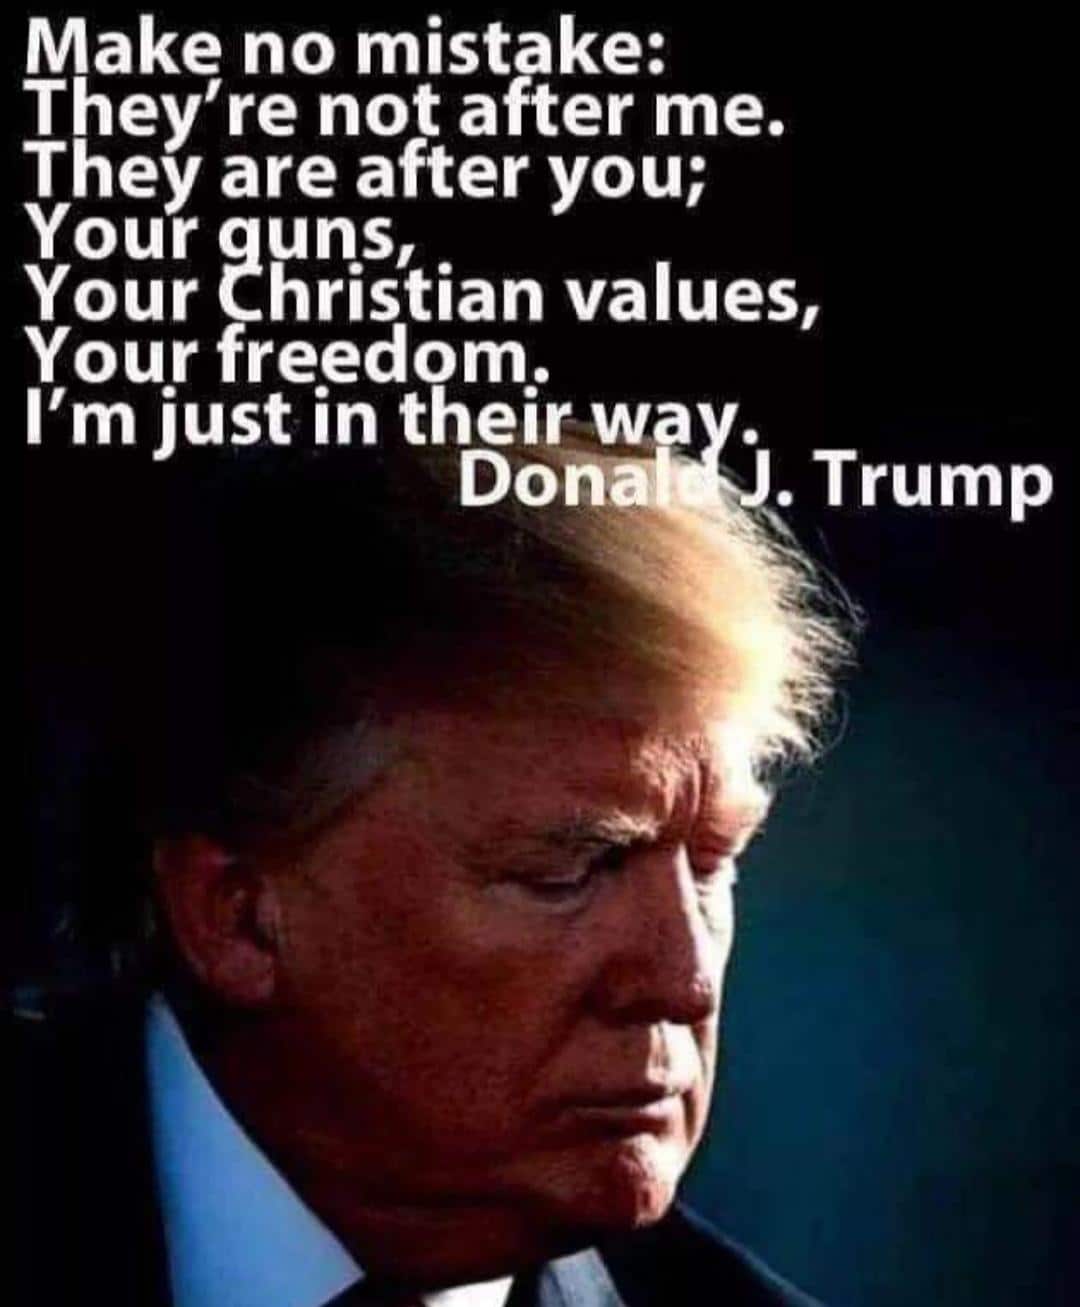 political political-memes political text: Make no mistake: They're not after me. They are after you; Your uns, Your 2hristian values, Your freedom. I'm just in their wa . . Trump Don 